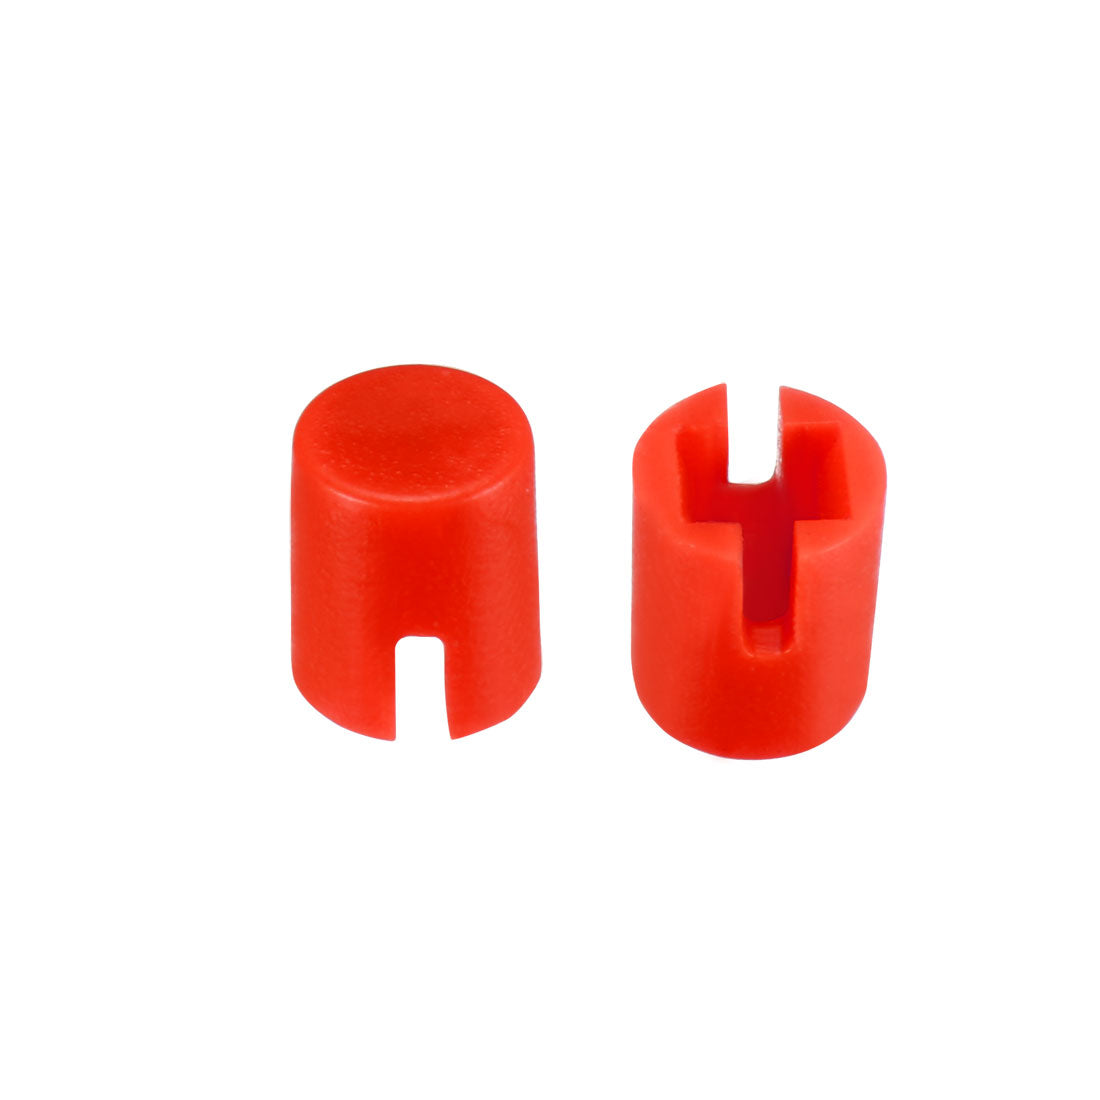 uxcell Uxcell 50Pcs Plastic 4.6x5.5mm Push Button Tactile Switch Caps Cover Keycaps Red for 6x6x7.3mm Tact Switch